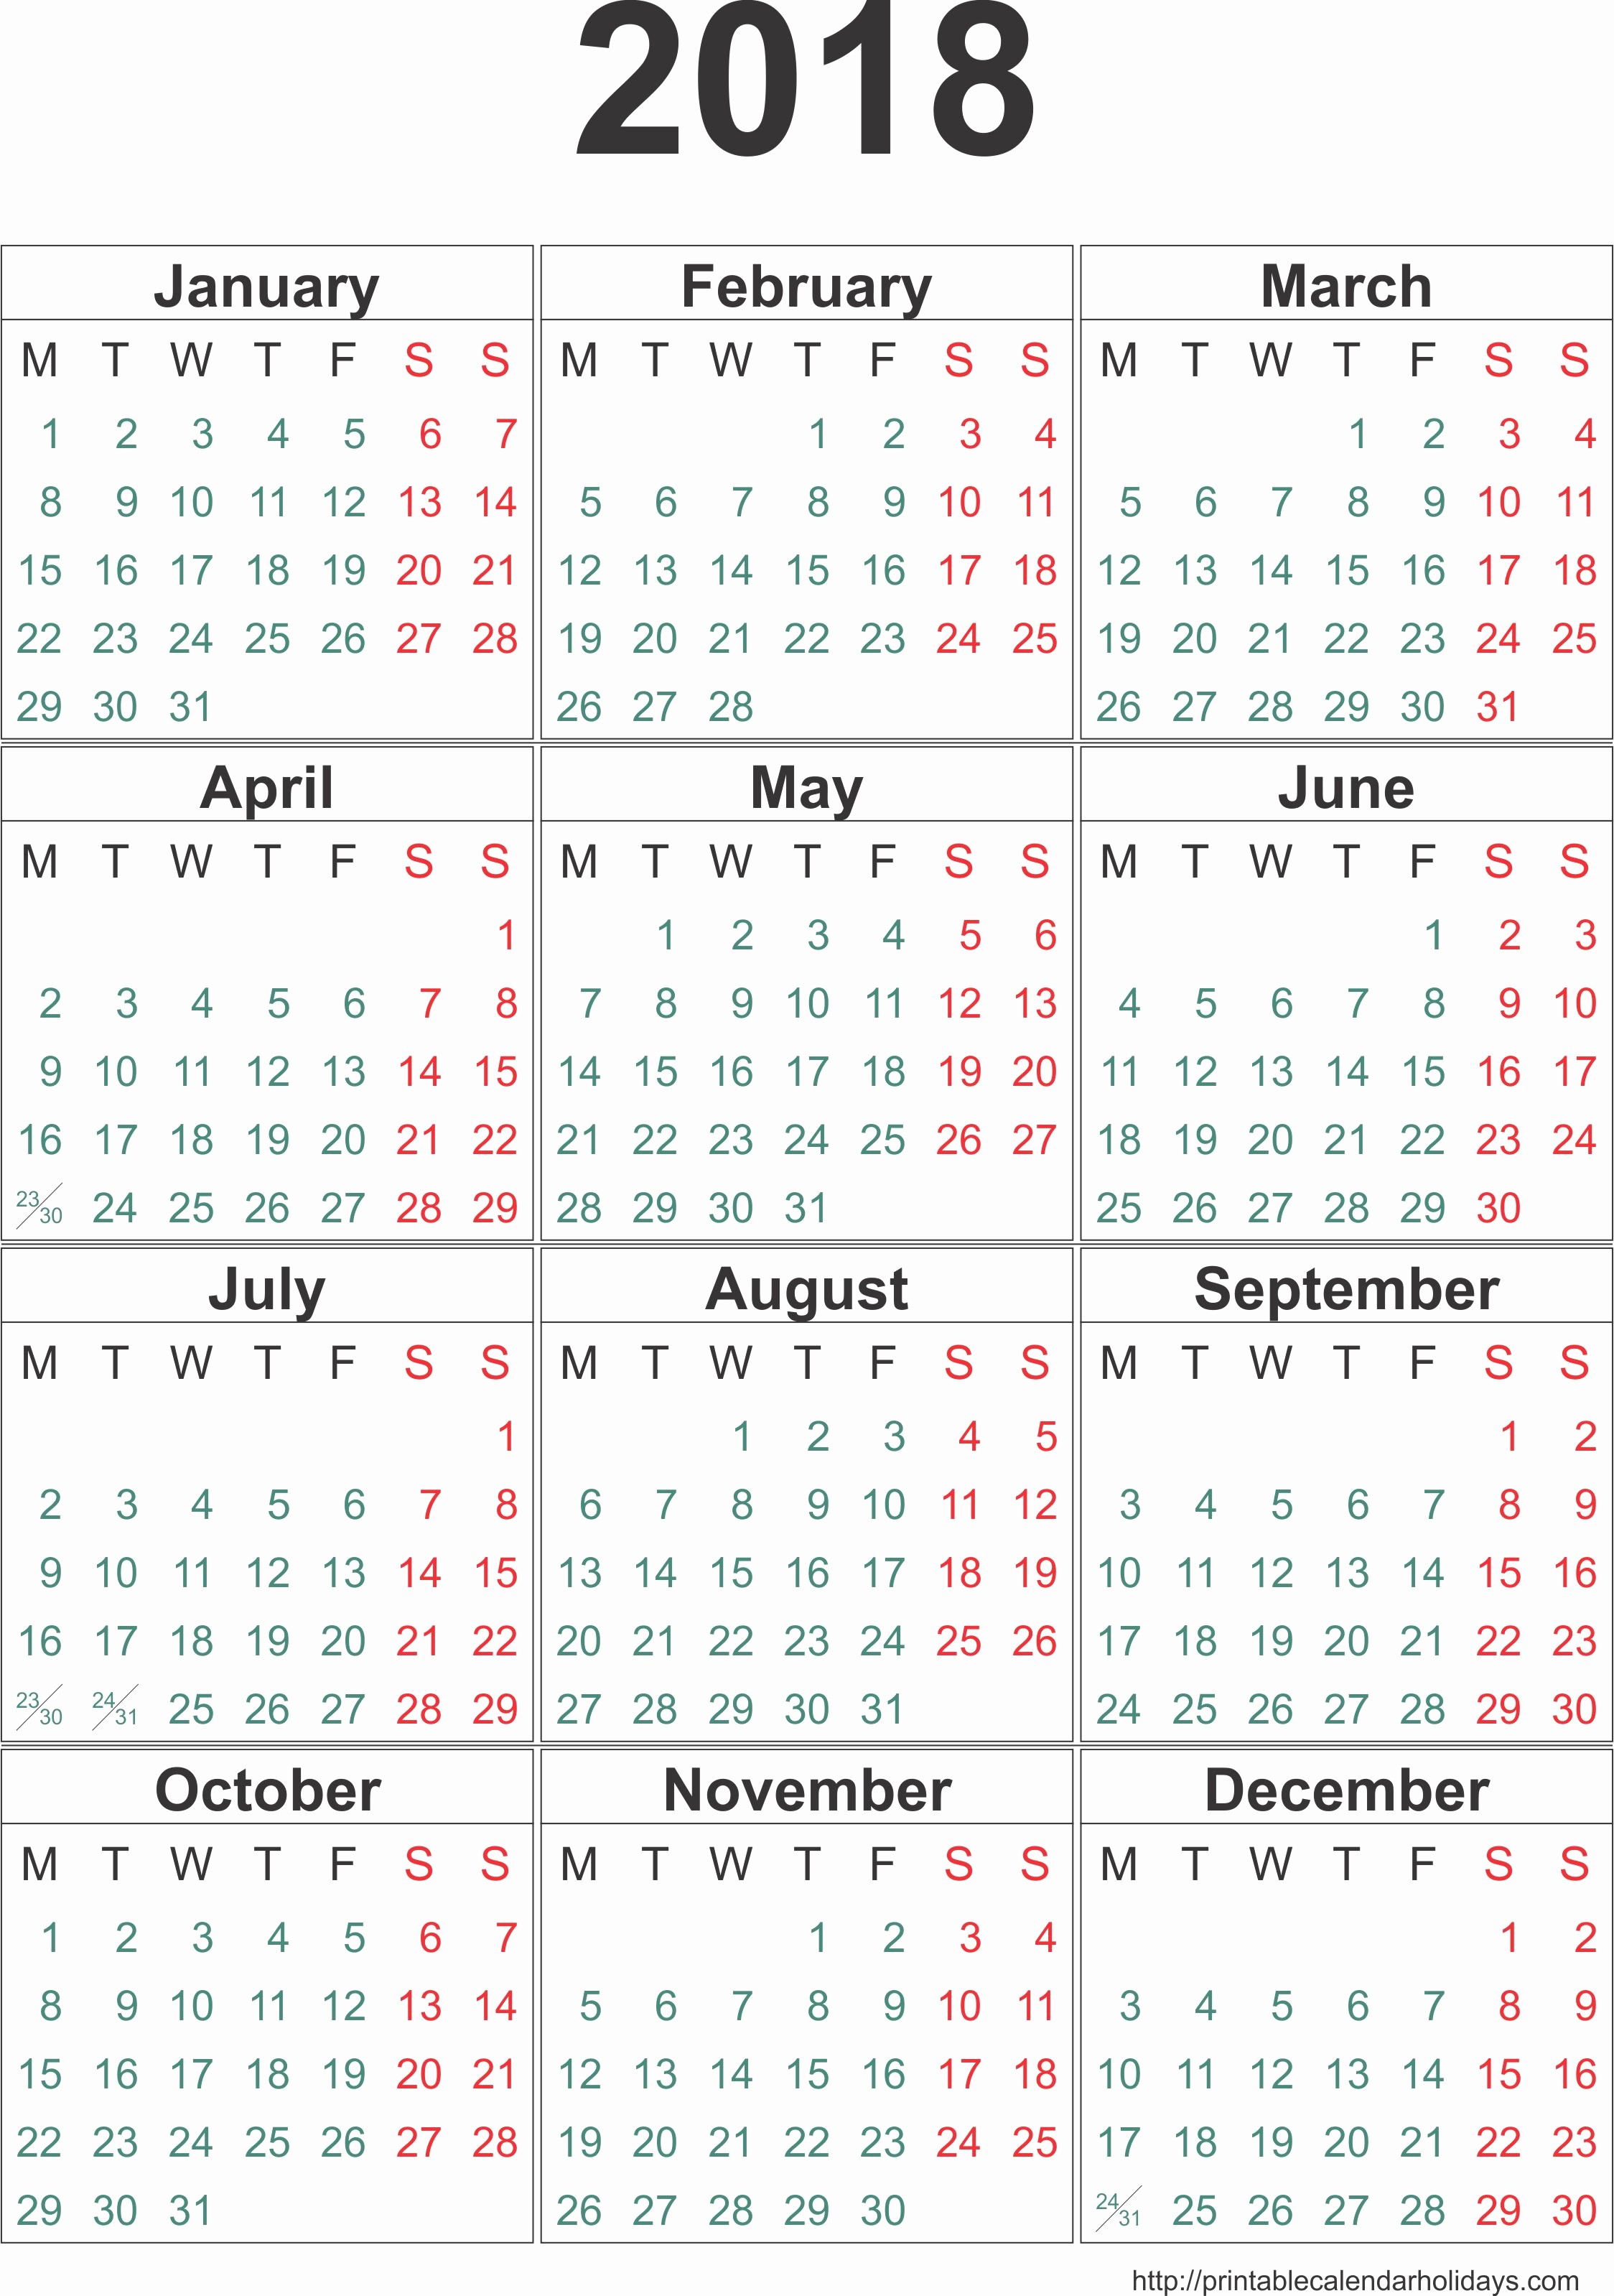 Month by Month Calendar Template Awesome 2018 Monthly Calendar Template